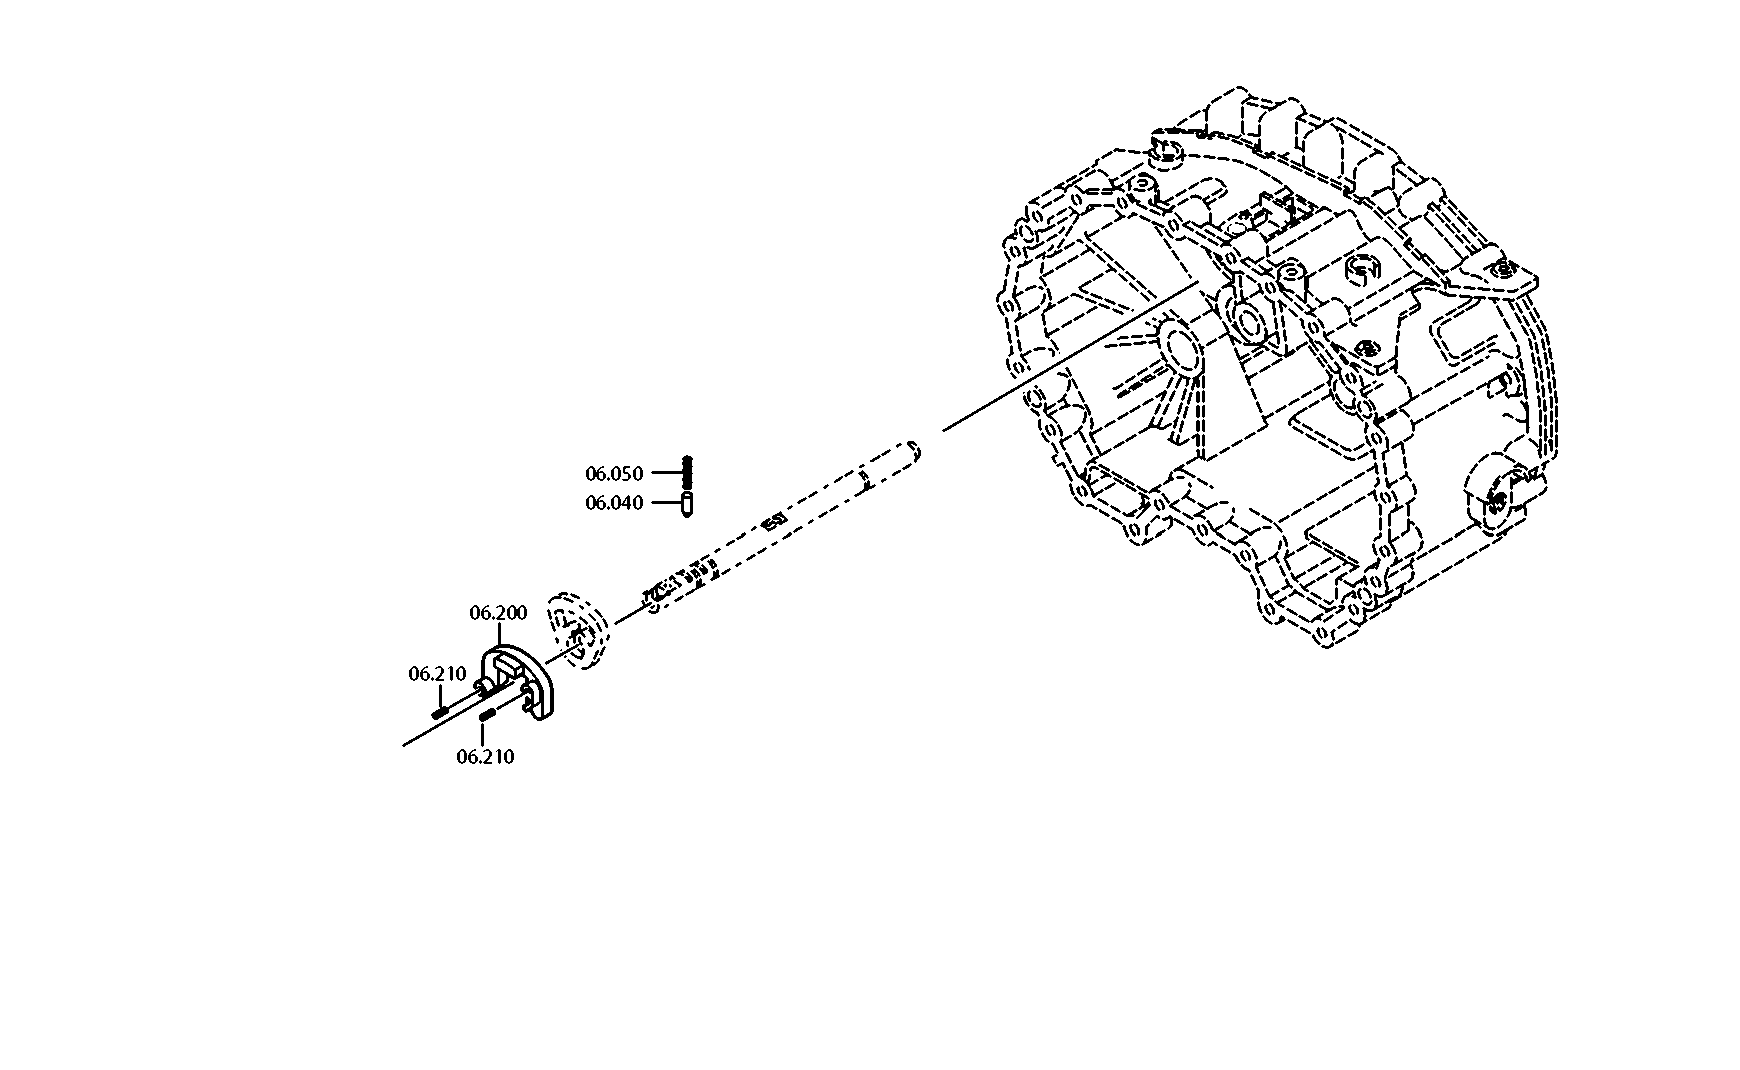 drawing for DAF 698413 - SHIFT CLAMP (figure 1)